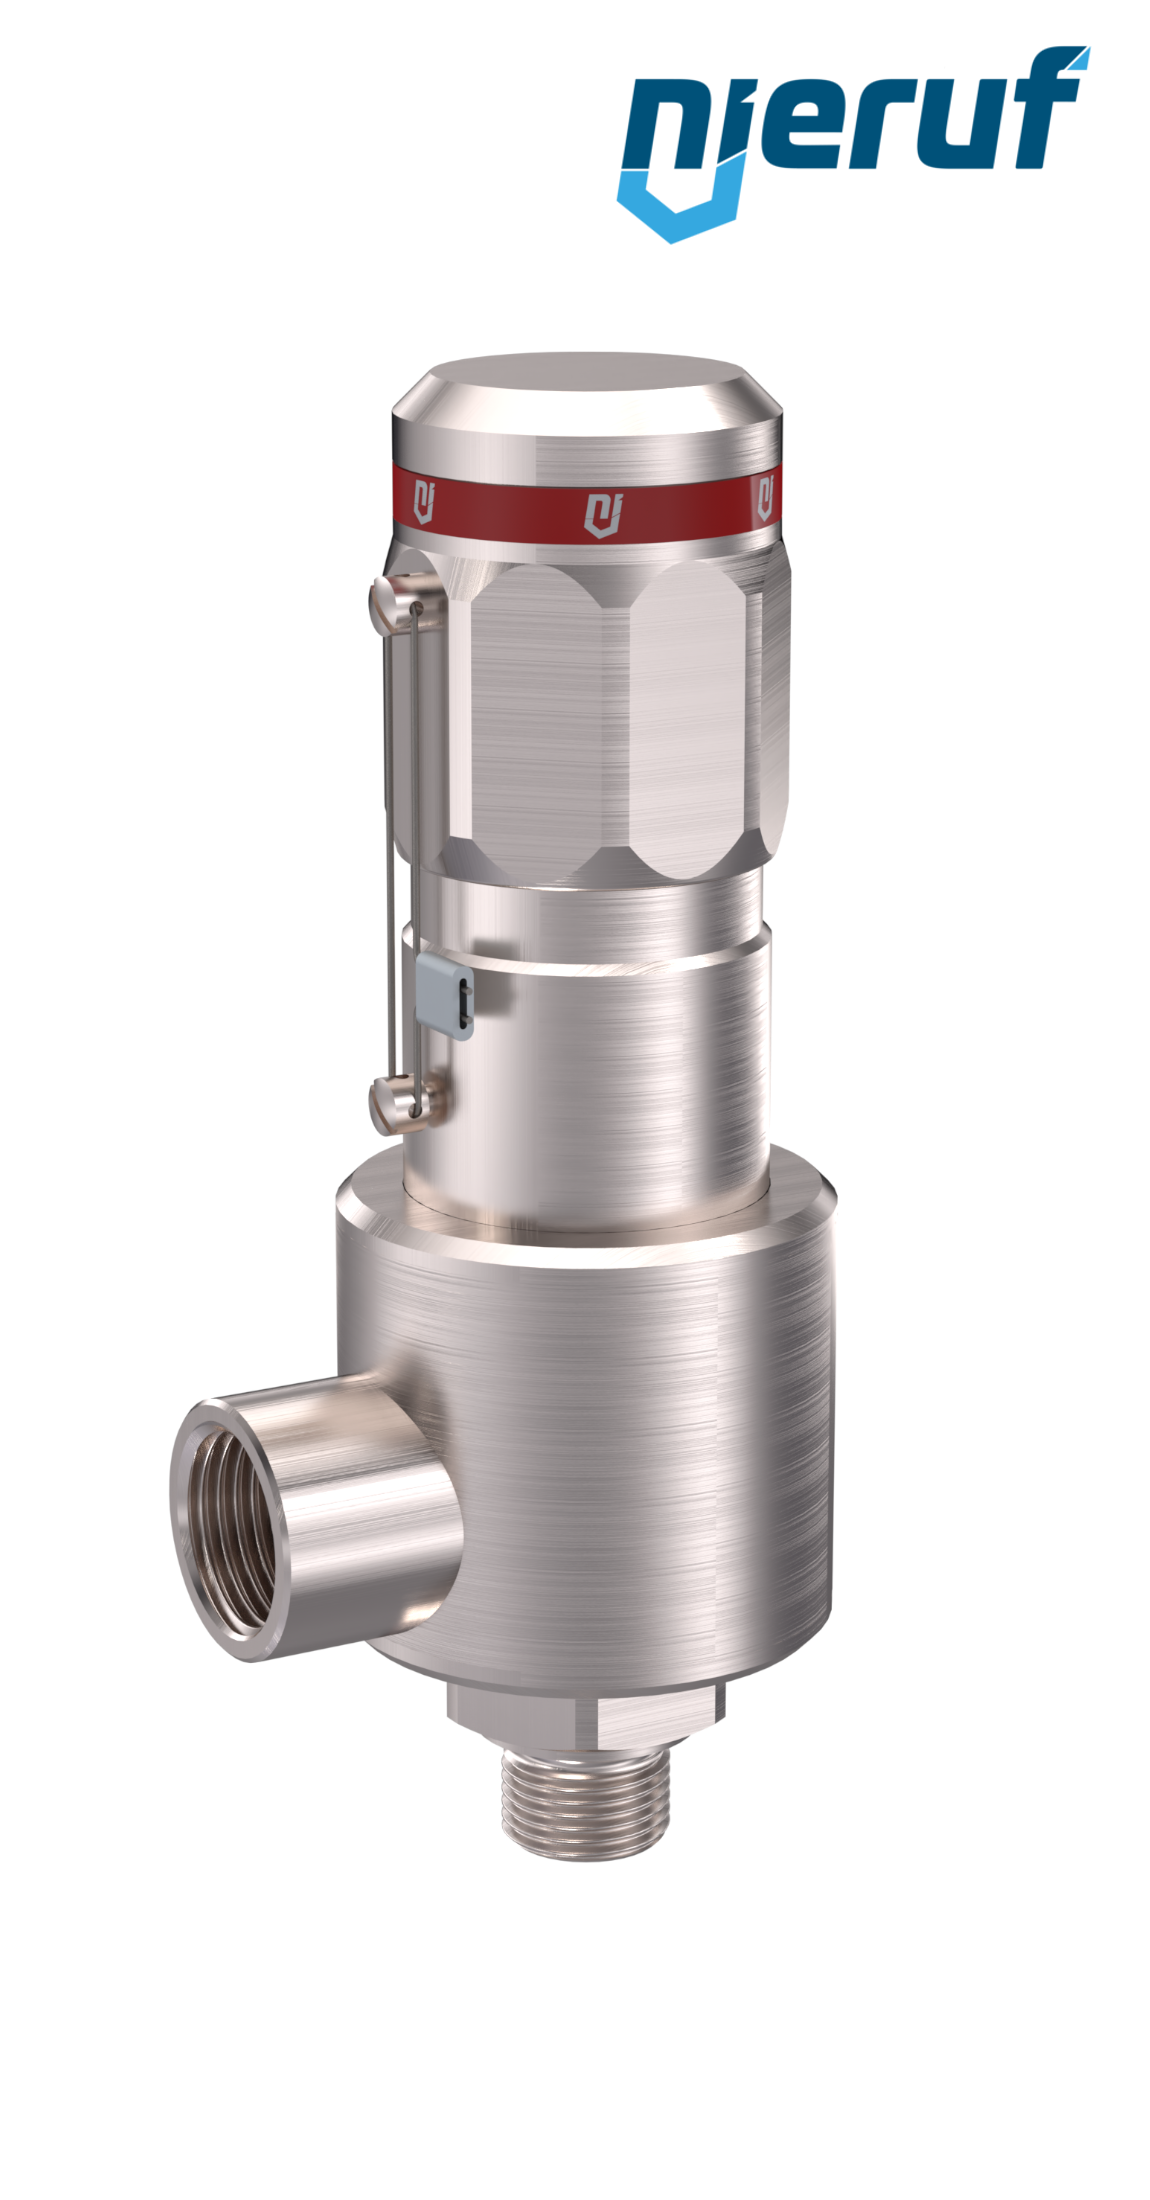 safety-valve DN6 1/4" m x 1/2" fm male thread NPT, SV15, MD/ PEEK, without lifting device, angle-type, >500,0 - 1100,0 bar